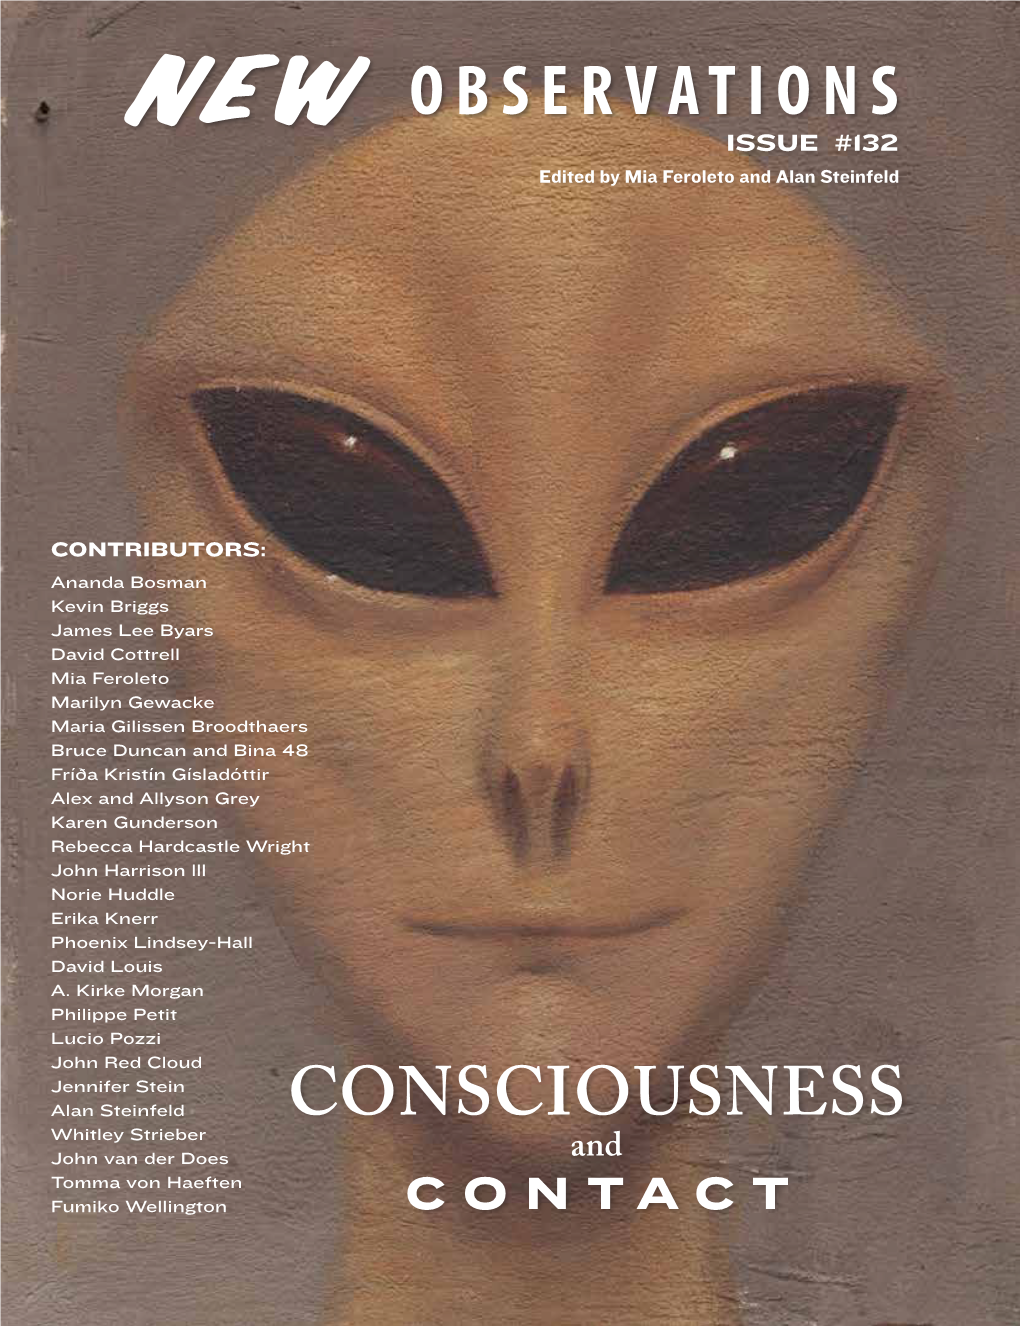 CONSCIOUSNESS John Van Der Does and Tomma Von Haeften Fumiko Wellington CONTACT CONSCIOUSNESS and CONTACT PUBLISHED BY: Mia Feroleto